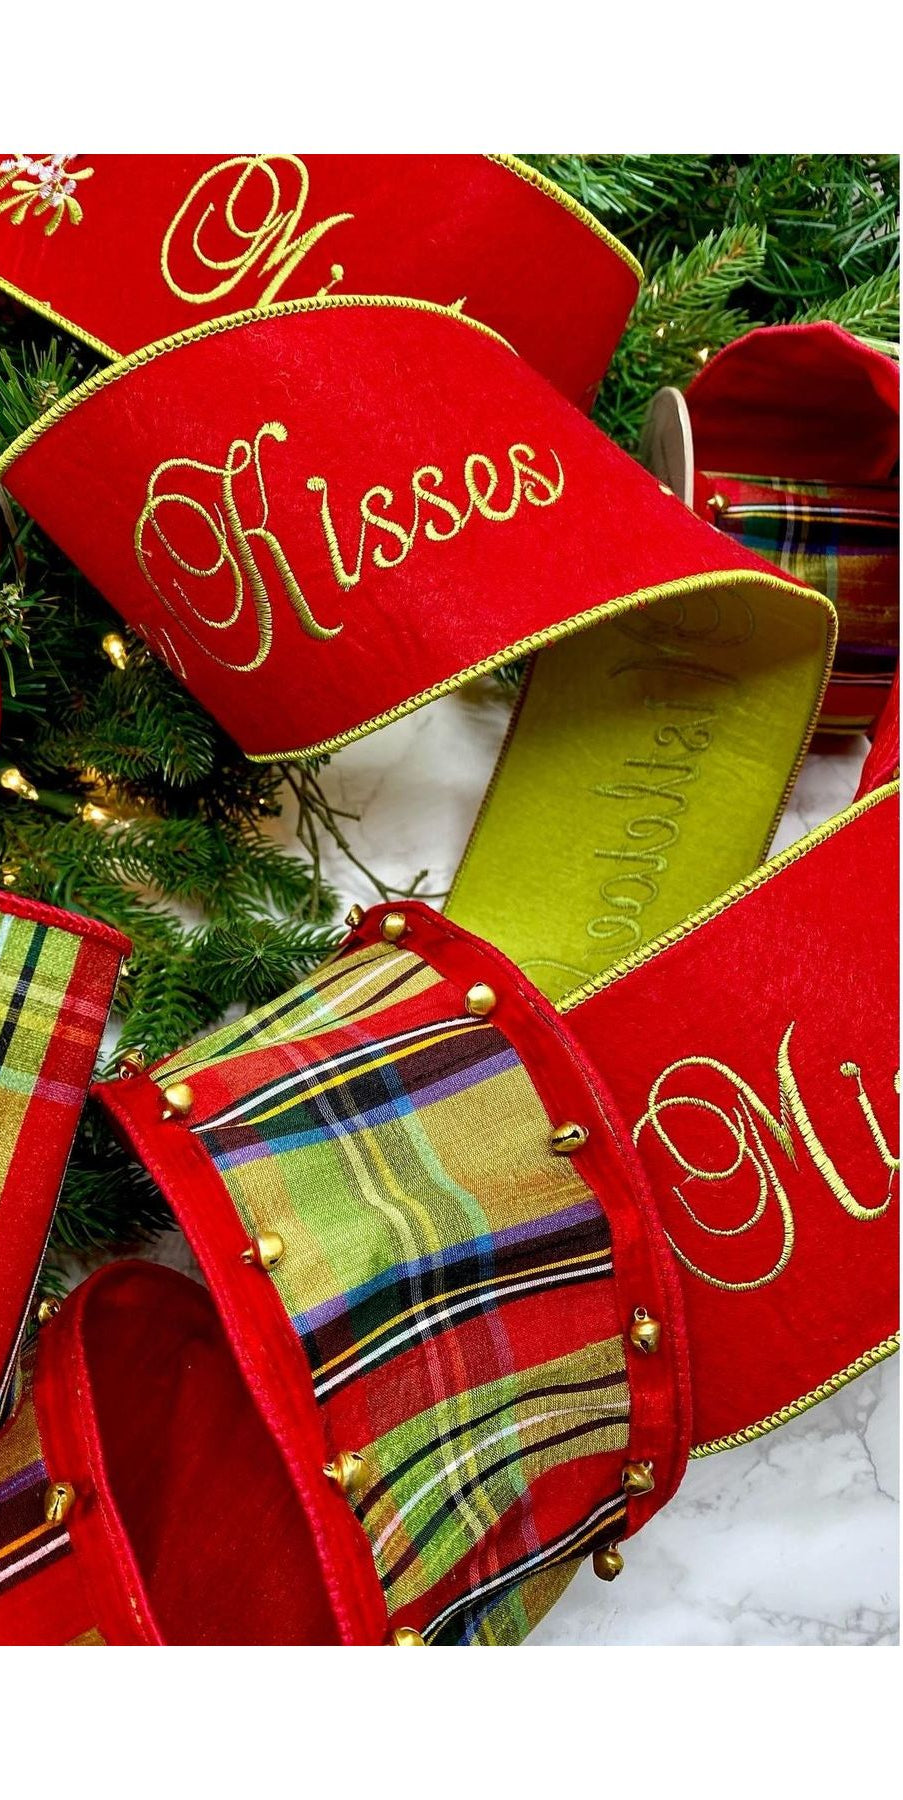 4" Embroidery Mistletoe Kisses Felt Ribbon: Red (5 Yards) - Michelle's aDOORable Creations - Wired Edge Ribbon